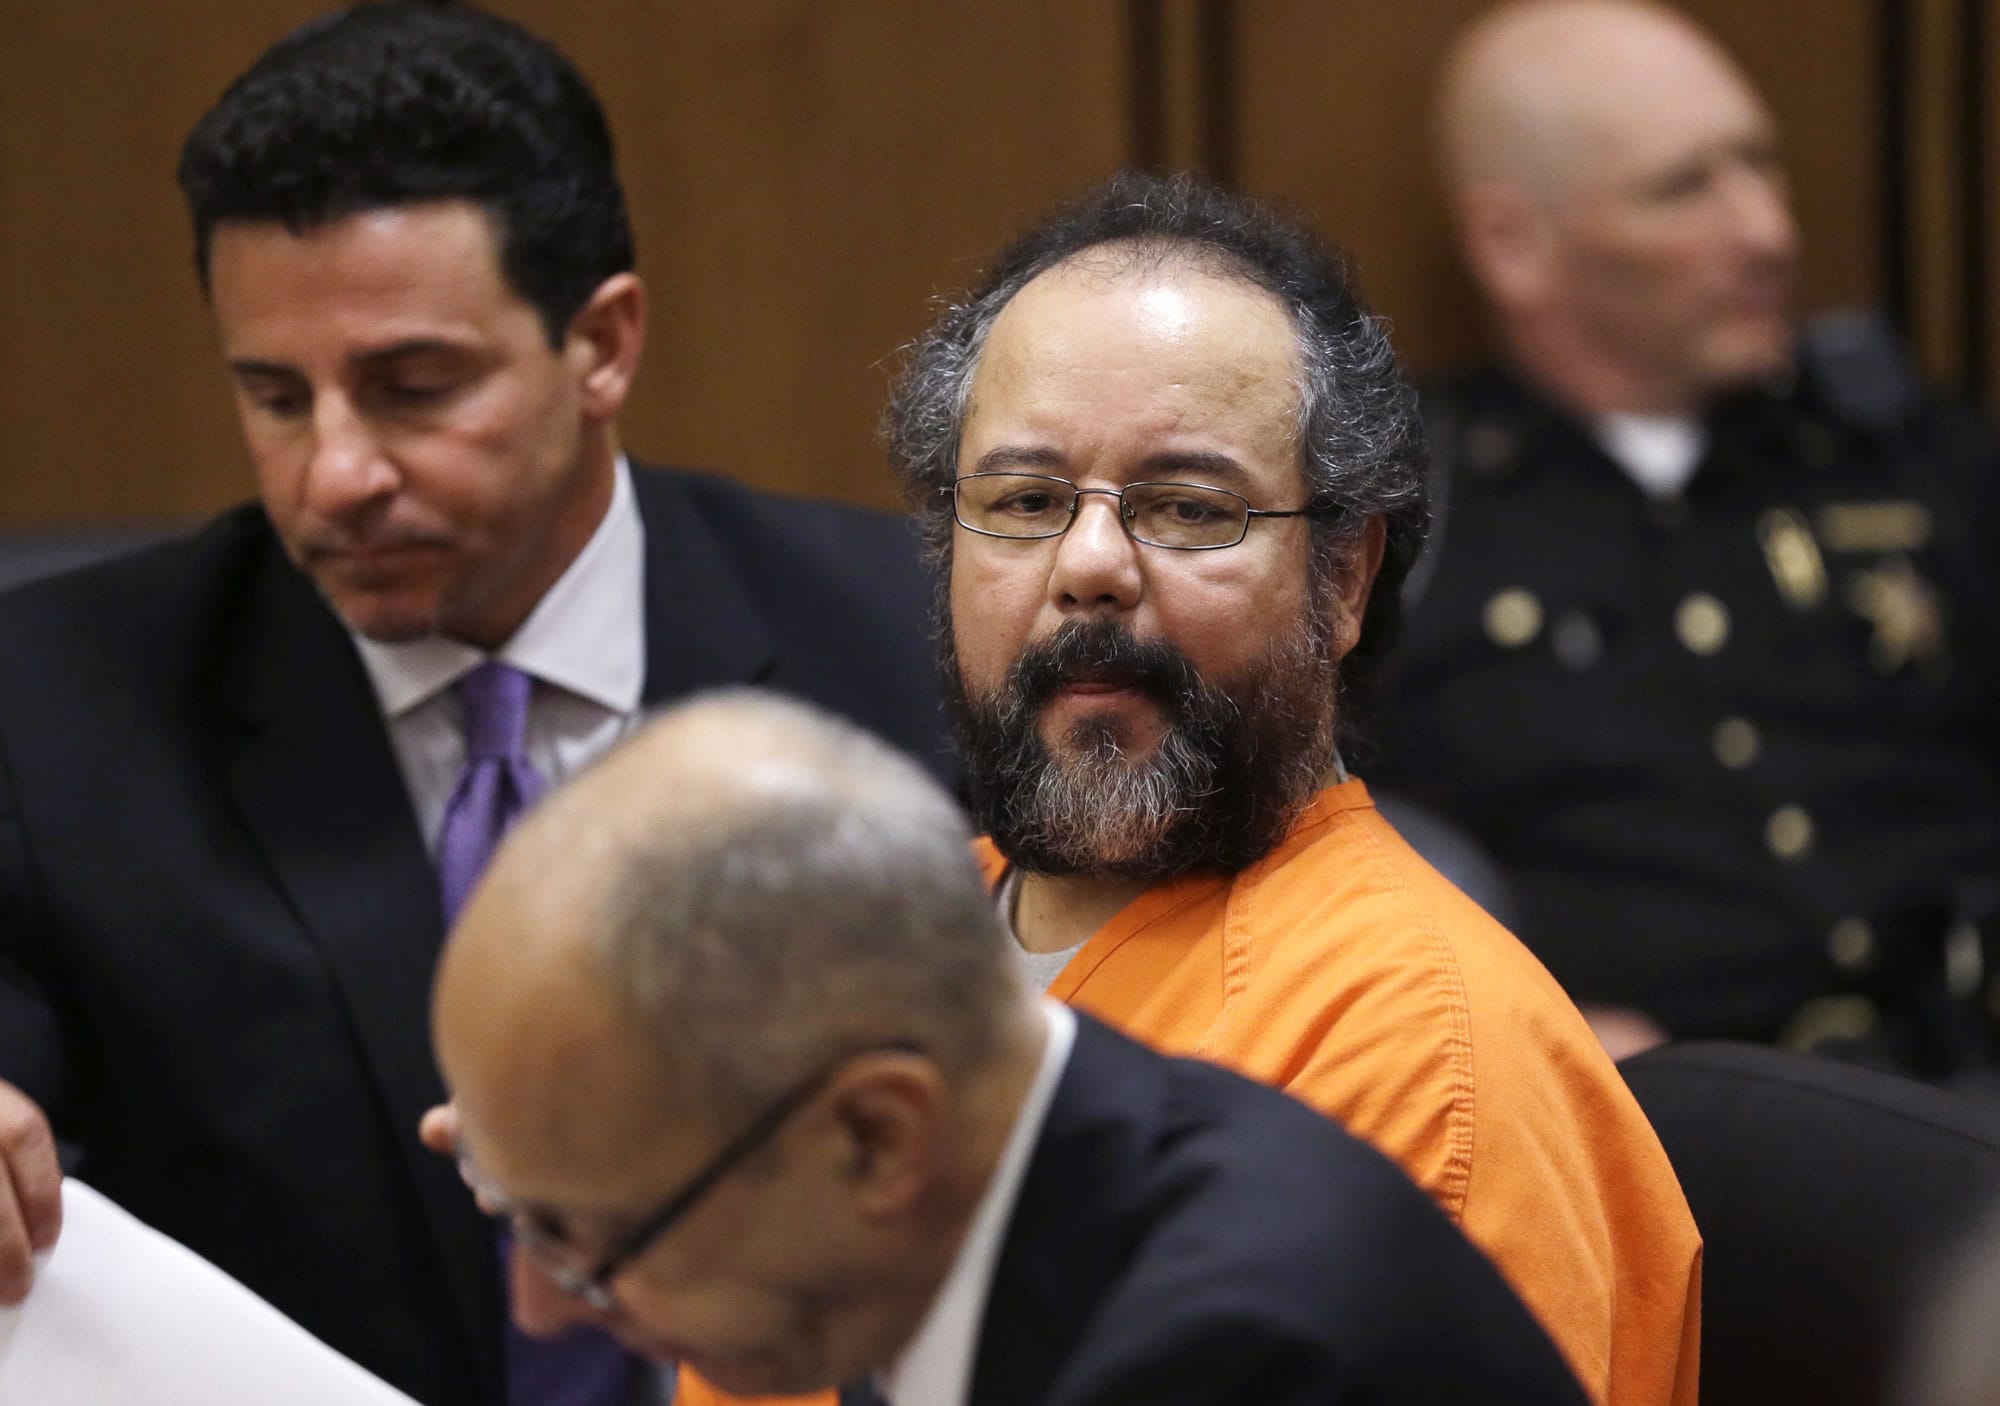 Ariel Castro looks at the prosecutors table during court proceedings Friday in Cleveland.